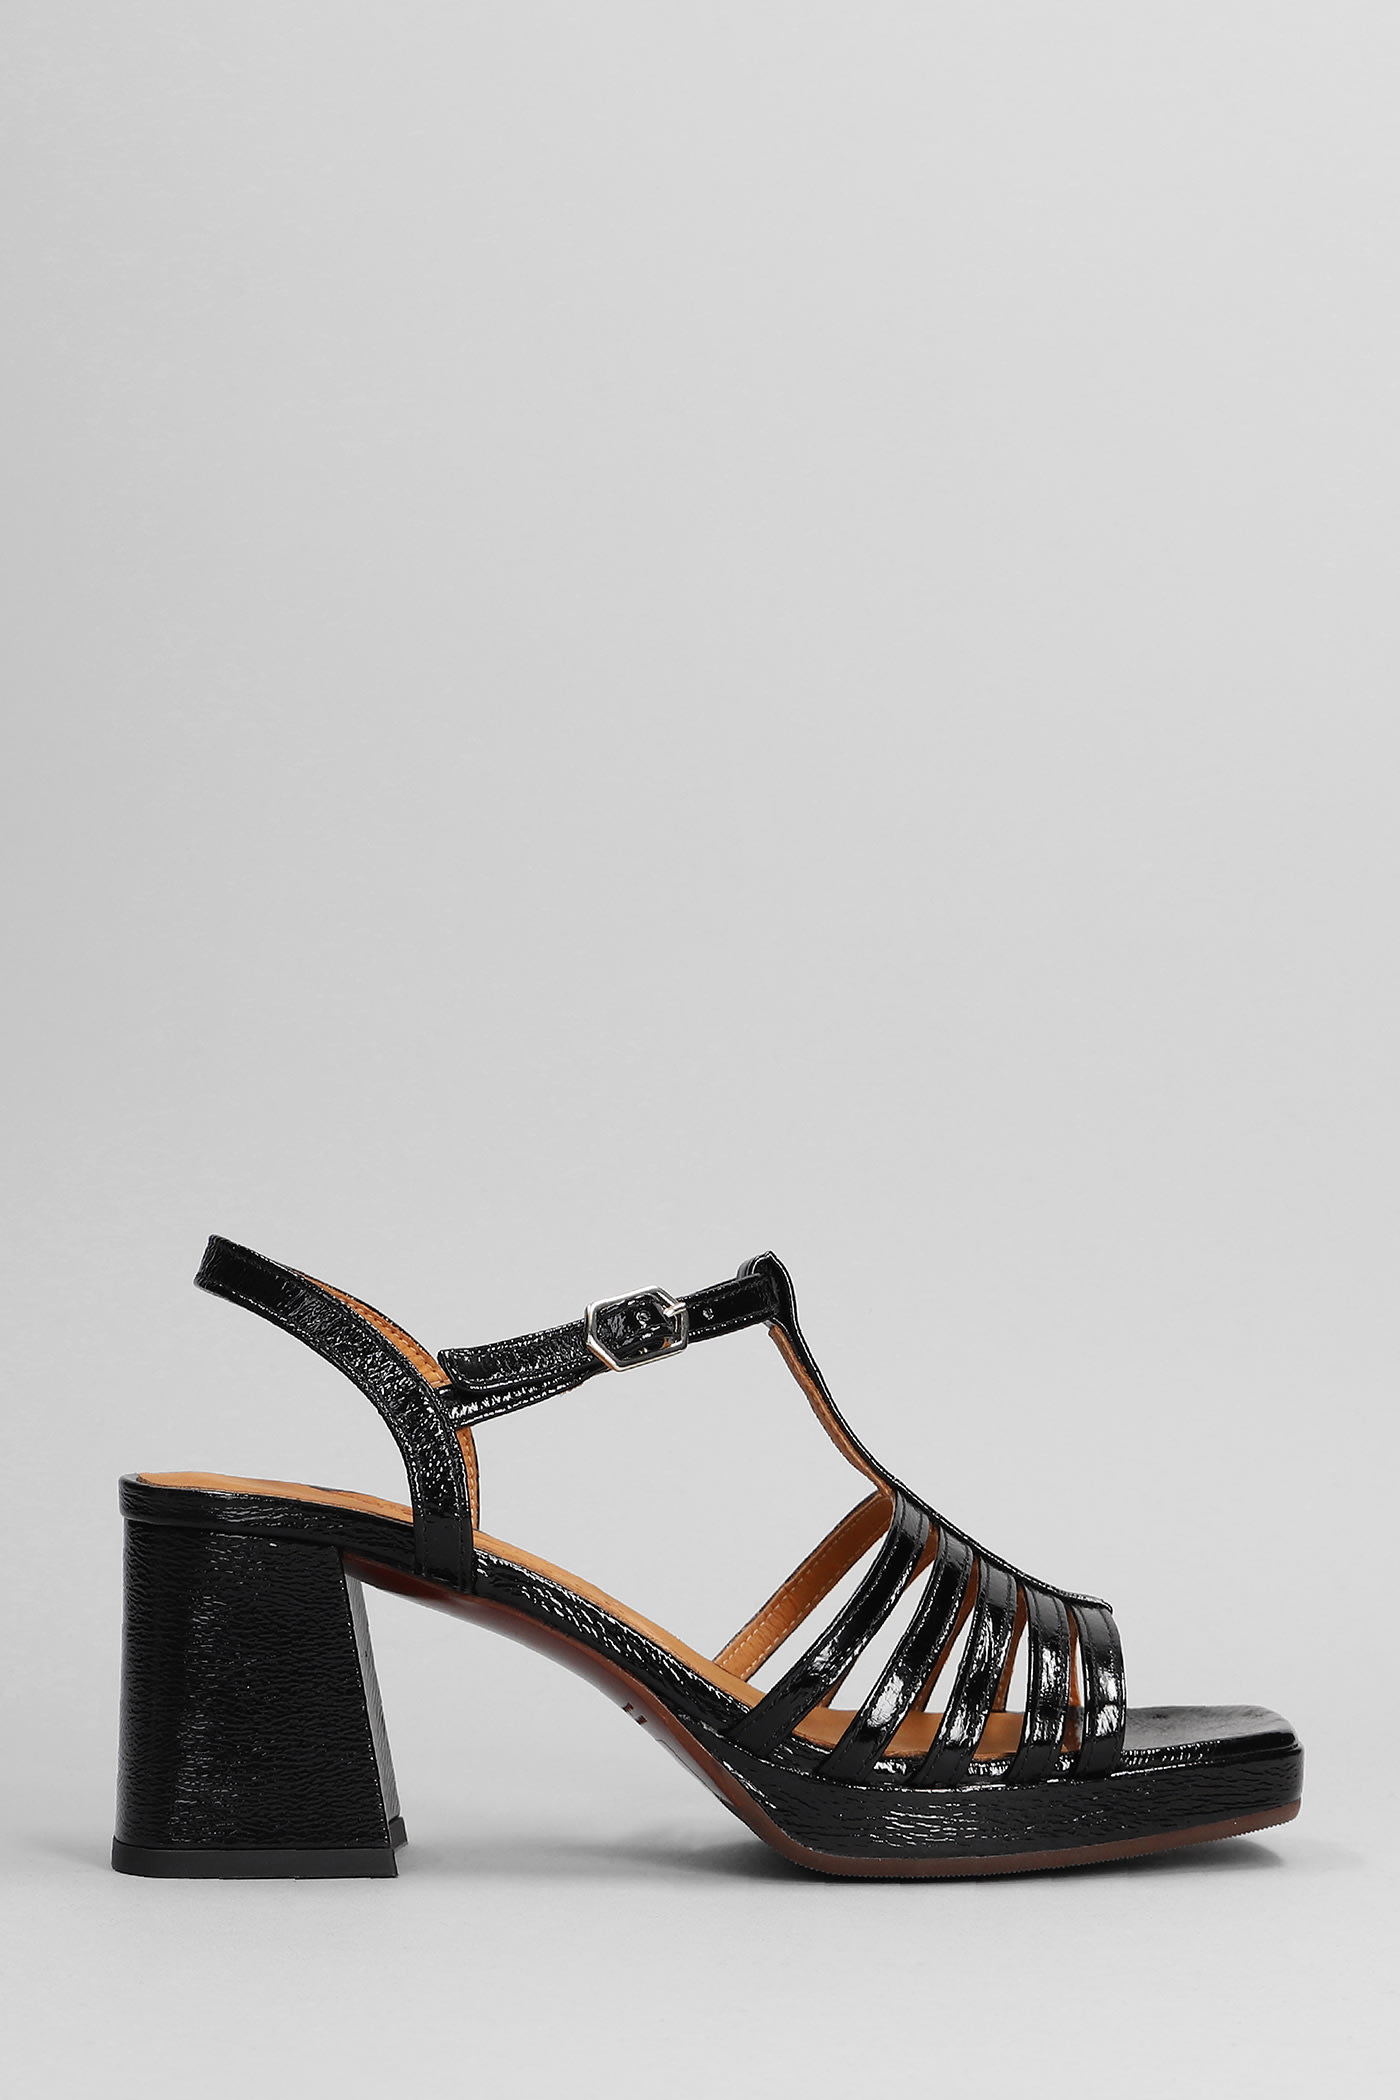 Chie Mihara Genial Sandals In Black Leather